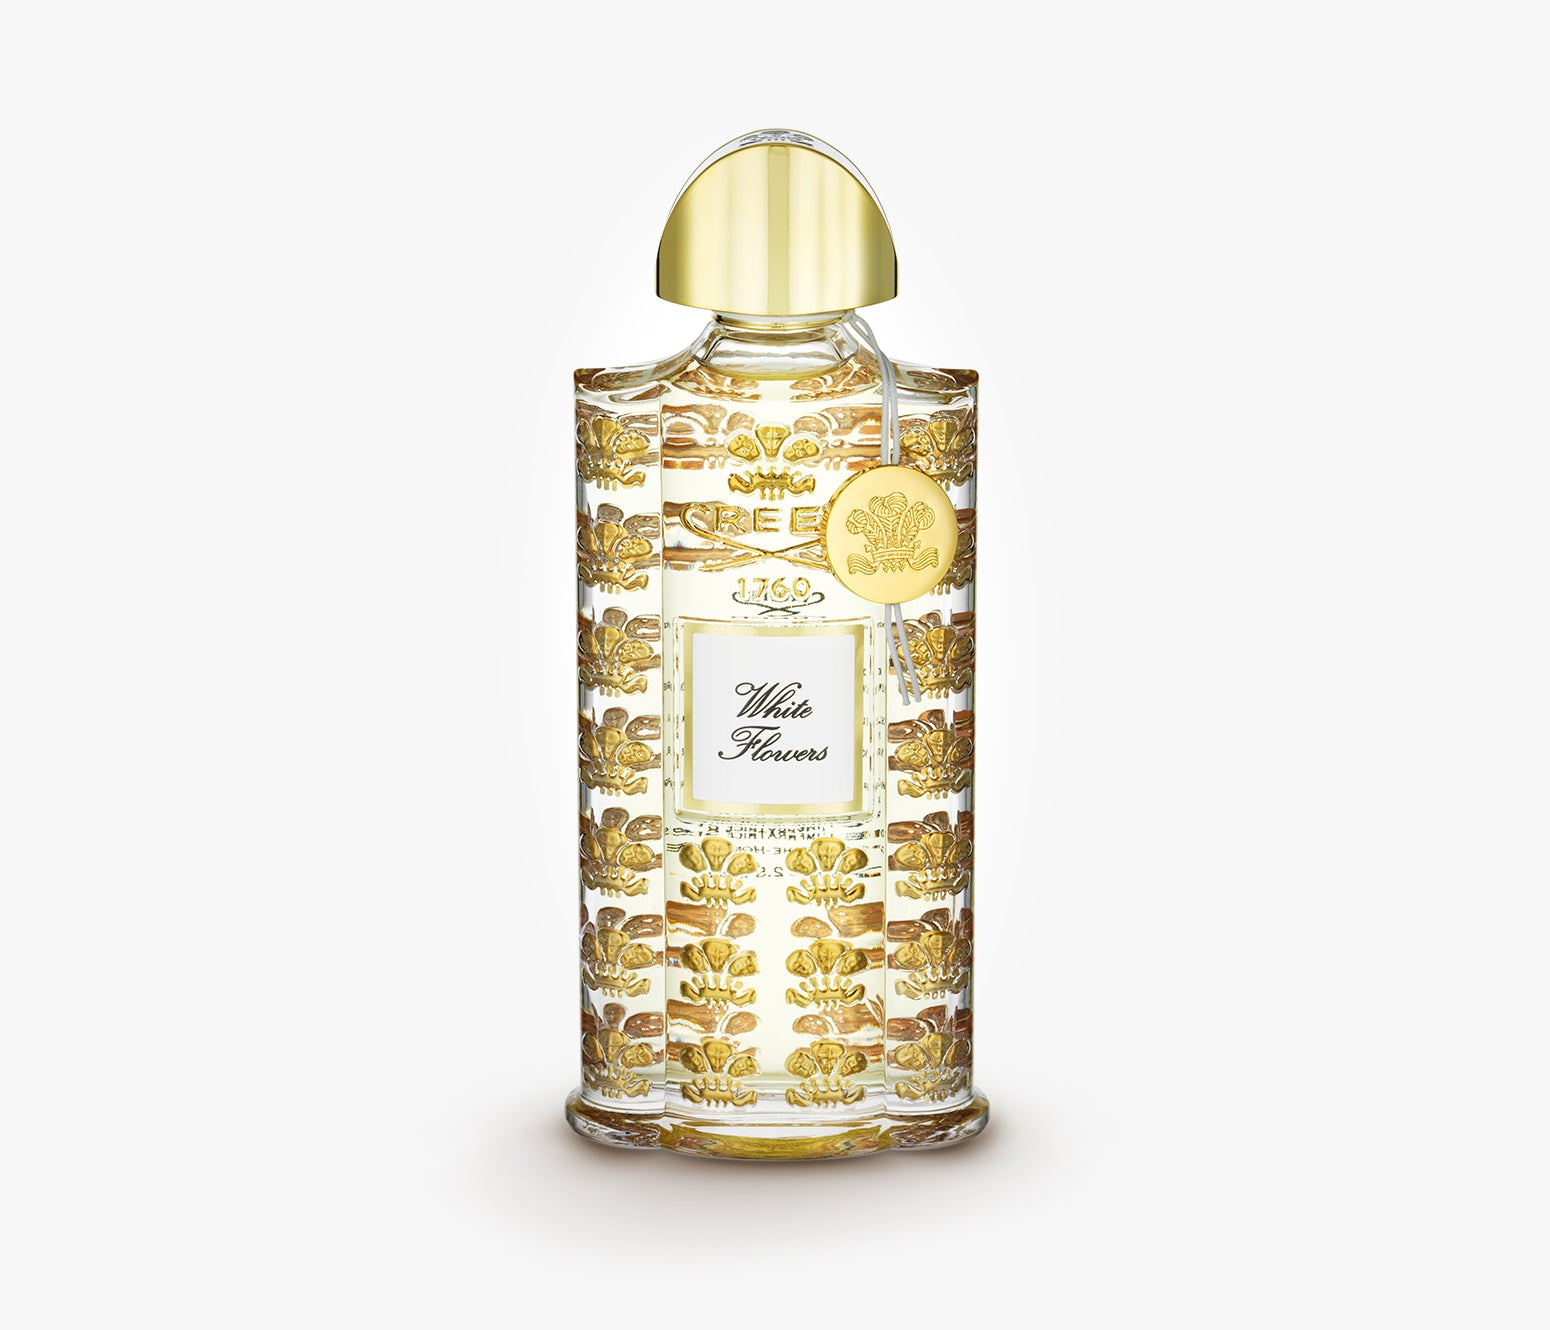 Creed - Royal Exclusives White Flowers - 75ml - VZW2789 - Product Image - Fragrance - Les Senteurs